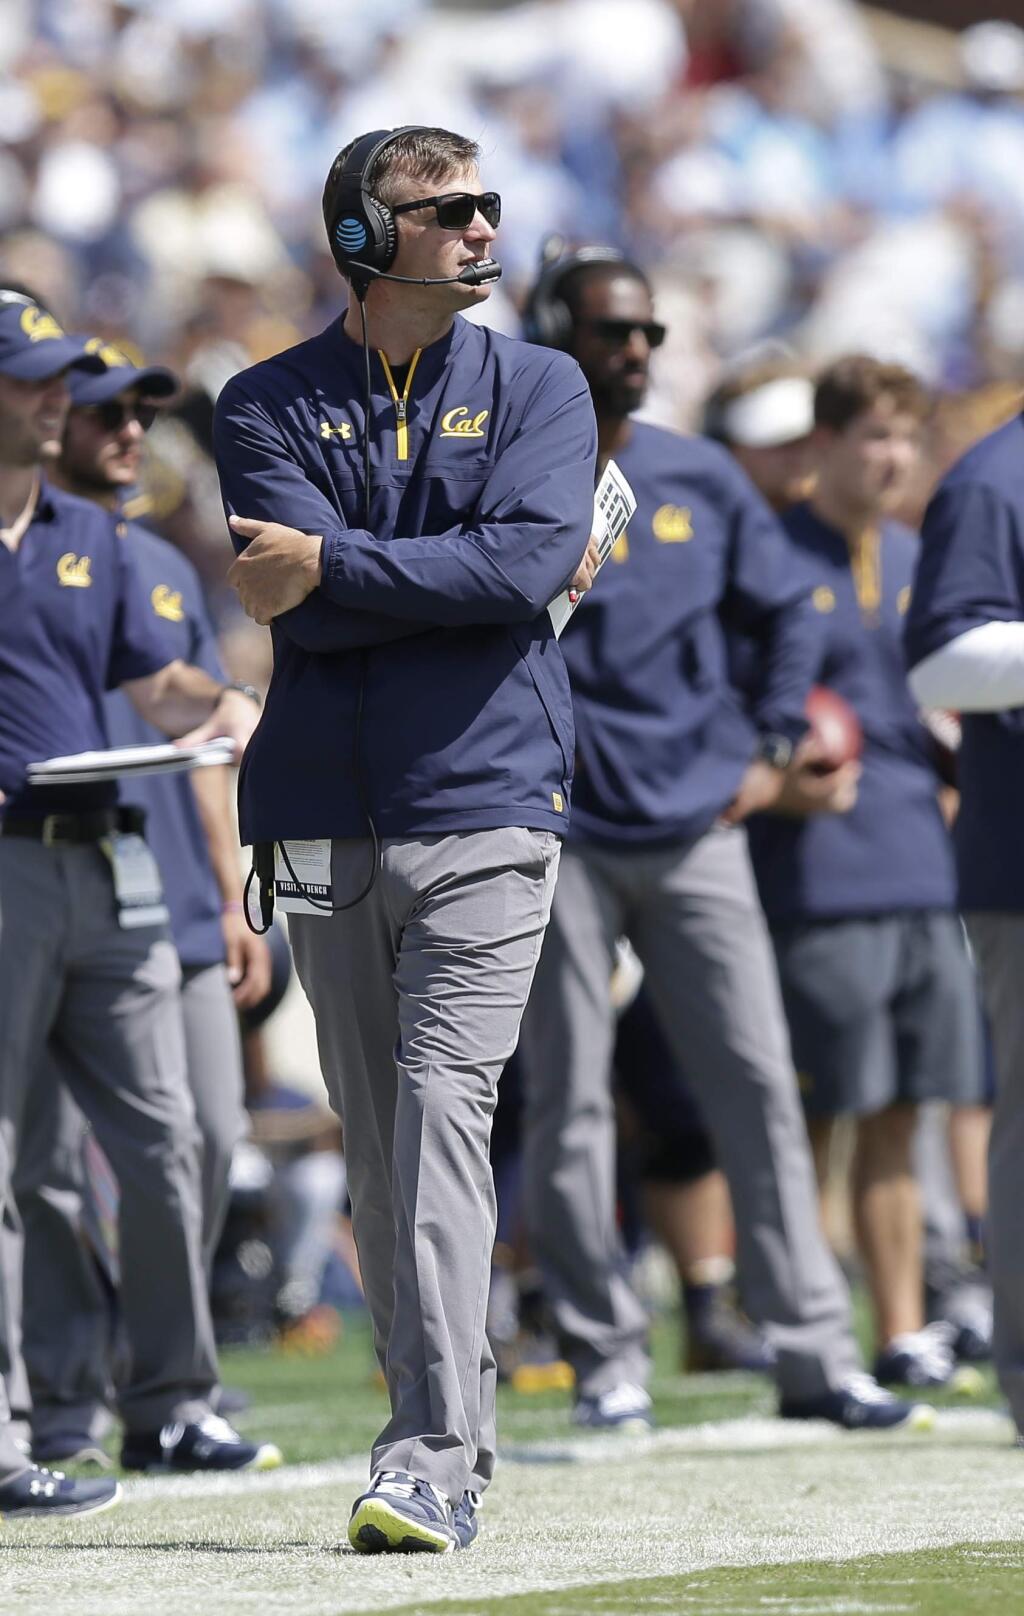 FILE - In this Sept. 2, 2017, file photo, California coach Justin Wilcox watches during the second half of the team's NCAA college football game against North Carolina in Chapel Hill, N.C. California plays Southern California this week; Wilcox is a former defensive coordinator at USC. (AP Photo/Gerry Broome, File)